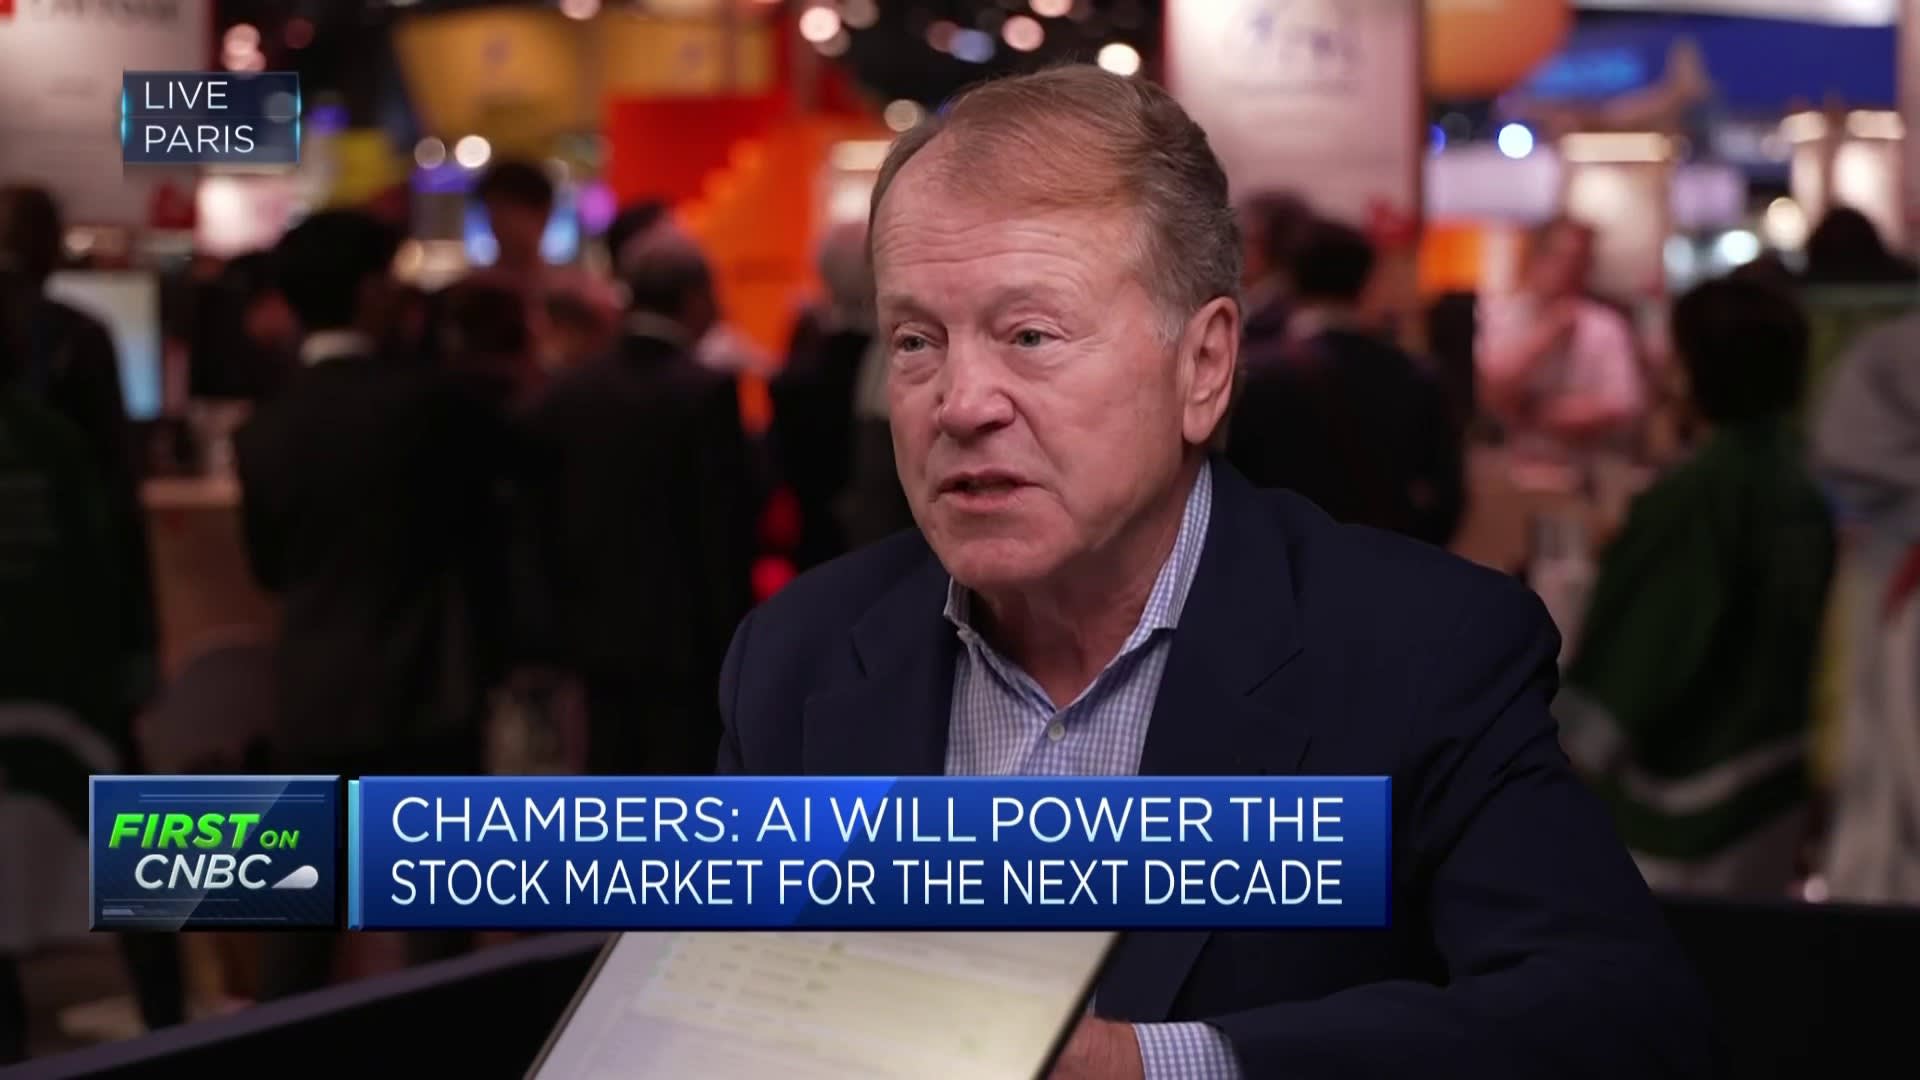 AI will power the stock market for the next decade, former Cisco CEO John Chambers says